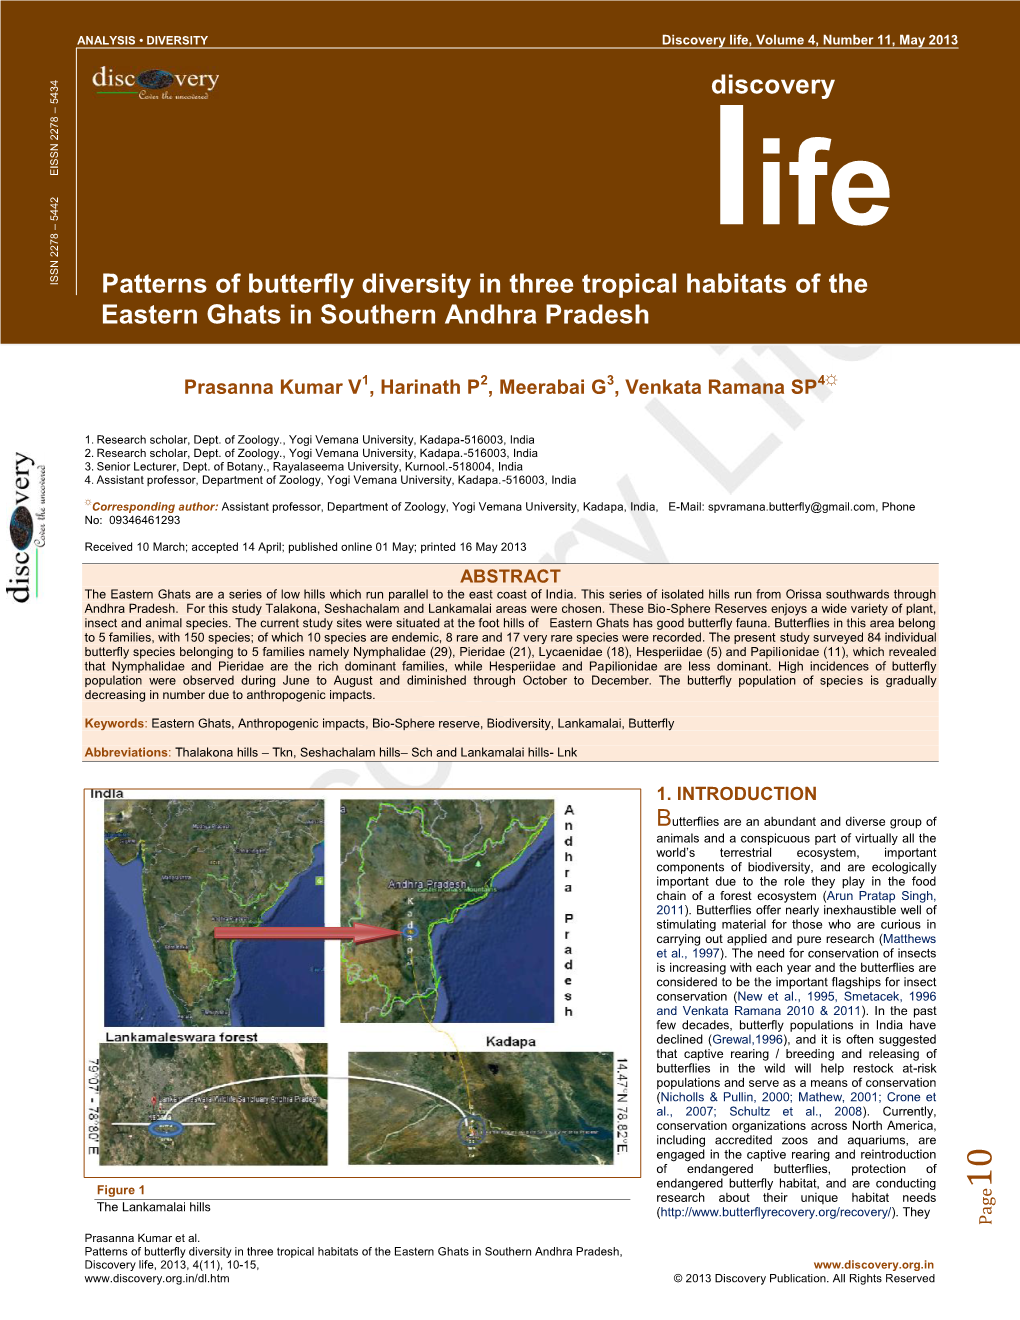 Discovery Patterns of Butterfly Diversity in Three Tropical Habitats of The